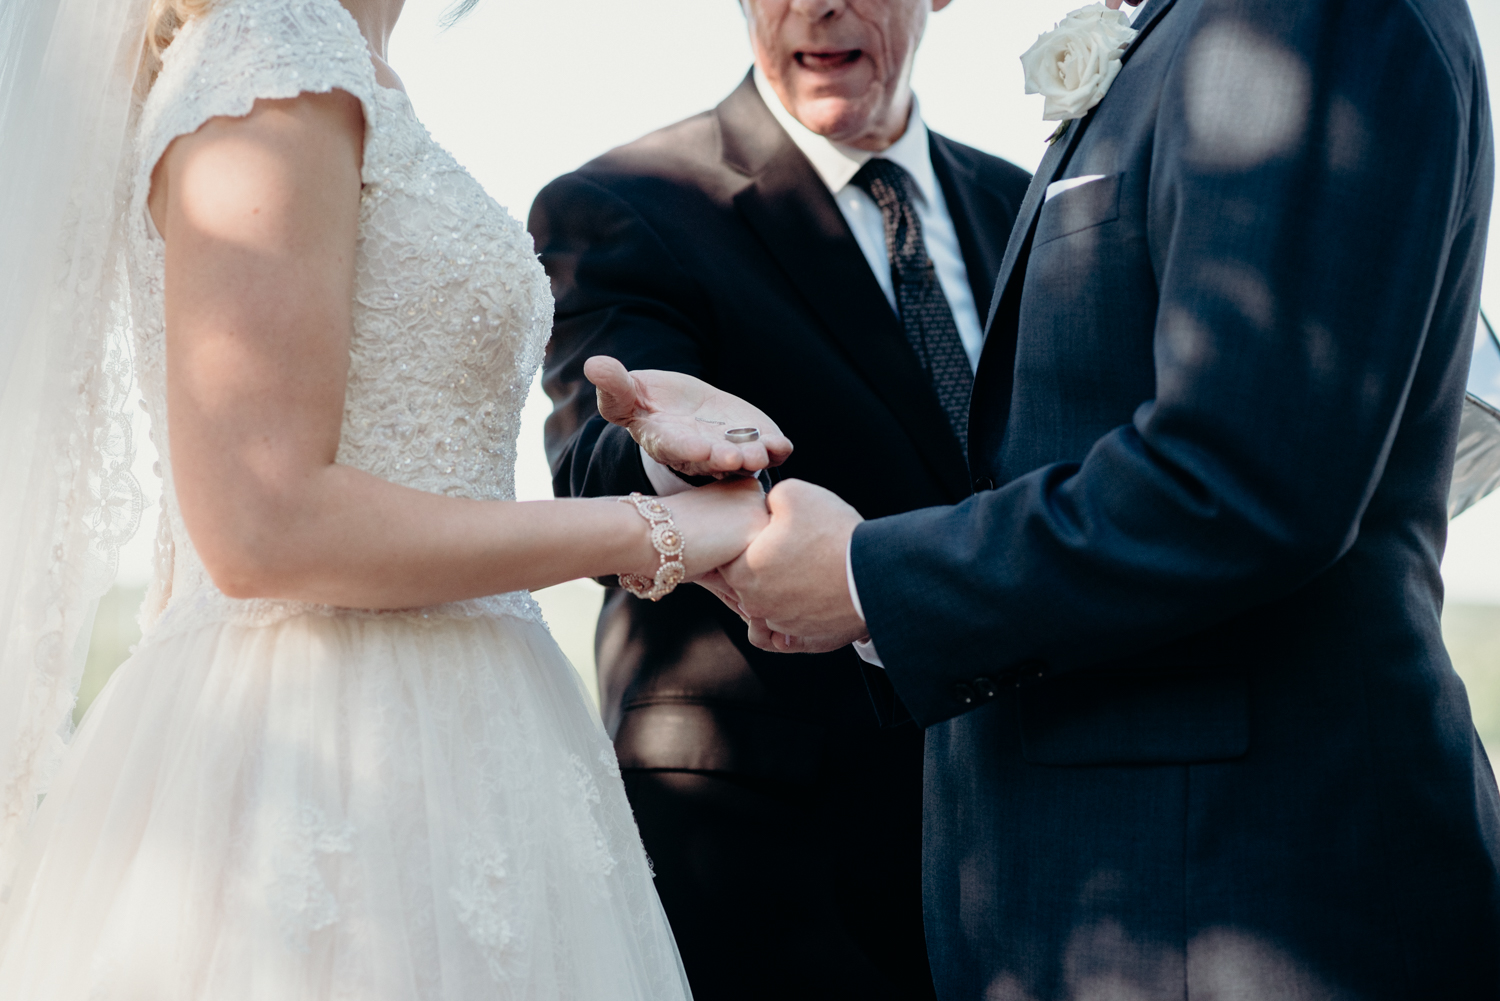 An officiant hands the bride and groom their rings during a ceremony at Lansdowne Resort.